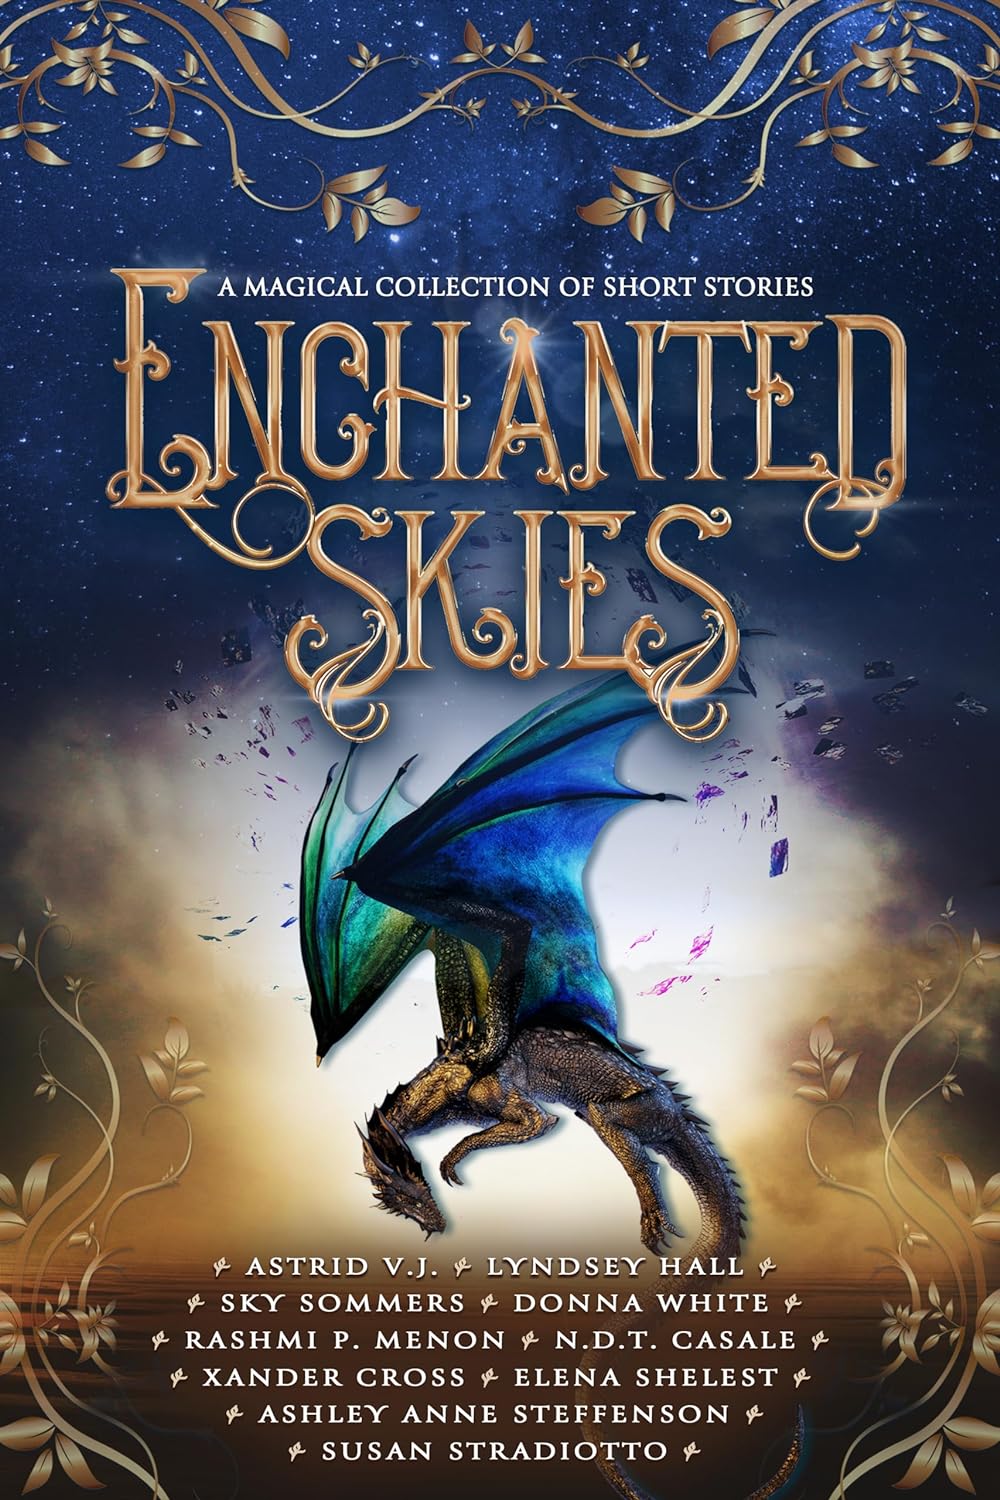 //skysommers.mediator.ee/wp-content/uploads/2023/09/Enchanted-skies-cover.jpg